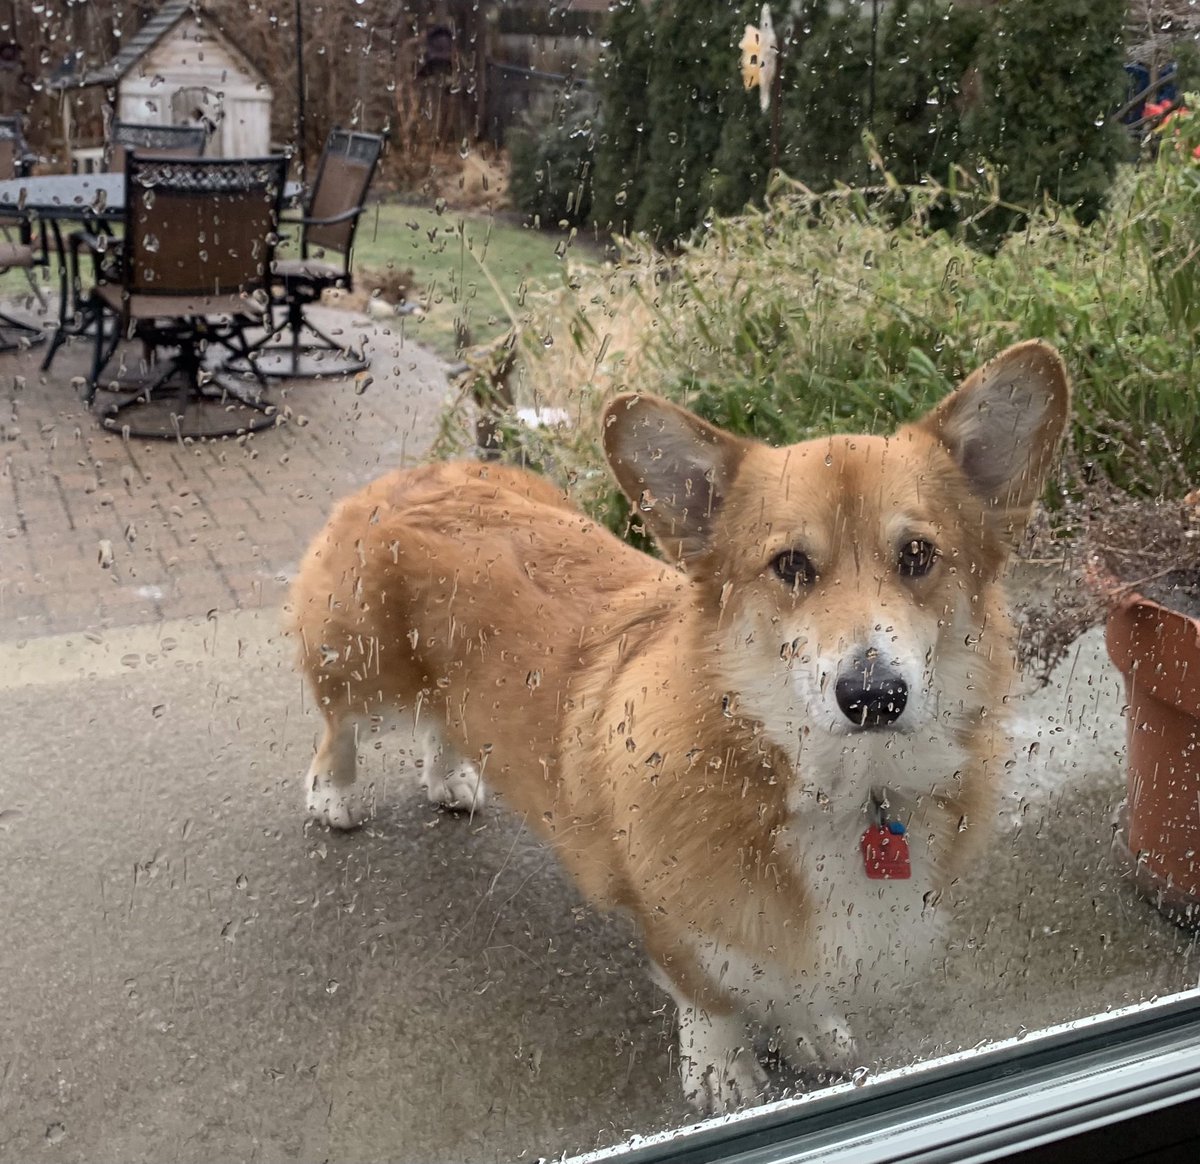 Let me in! It’s gross out here. #CorgiCrew #michiganweather